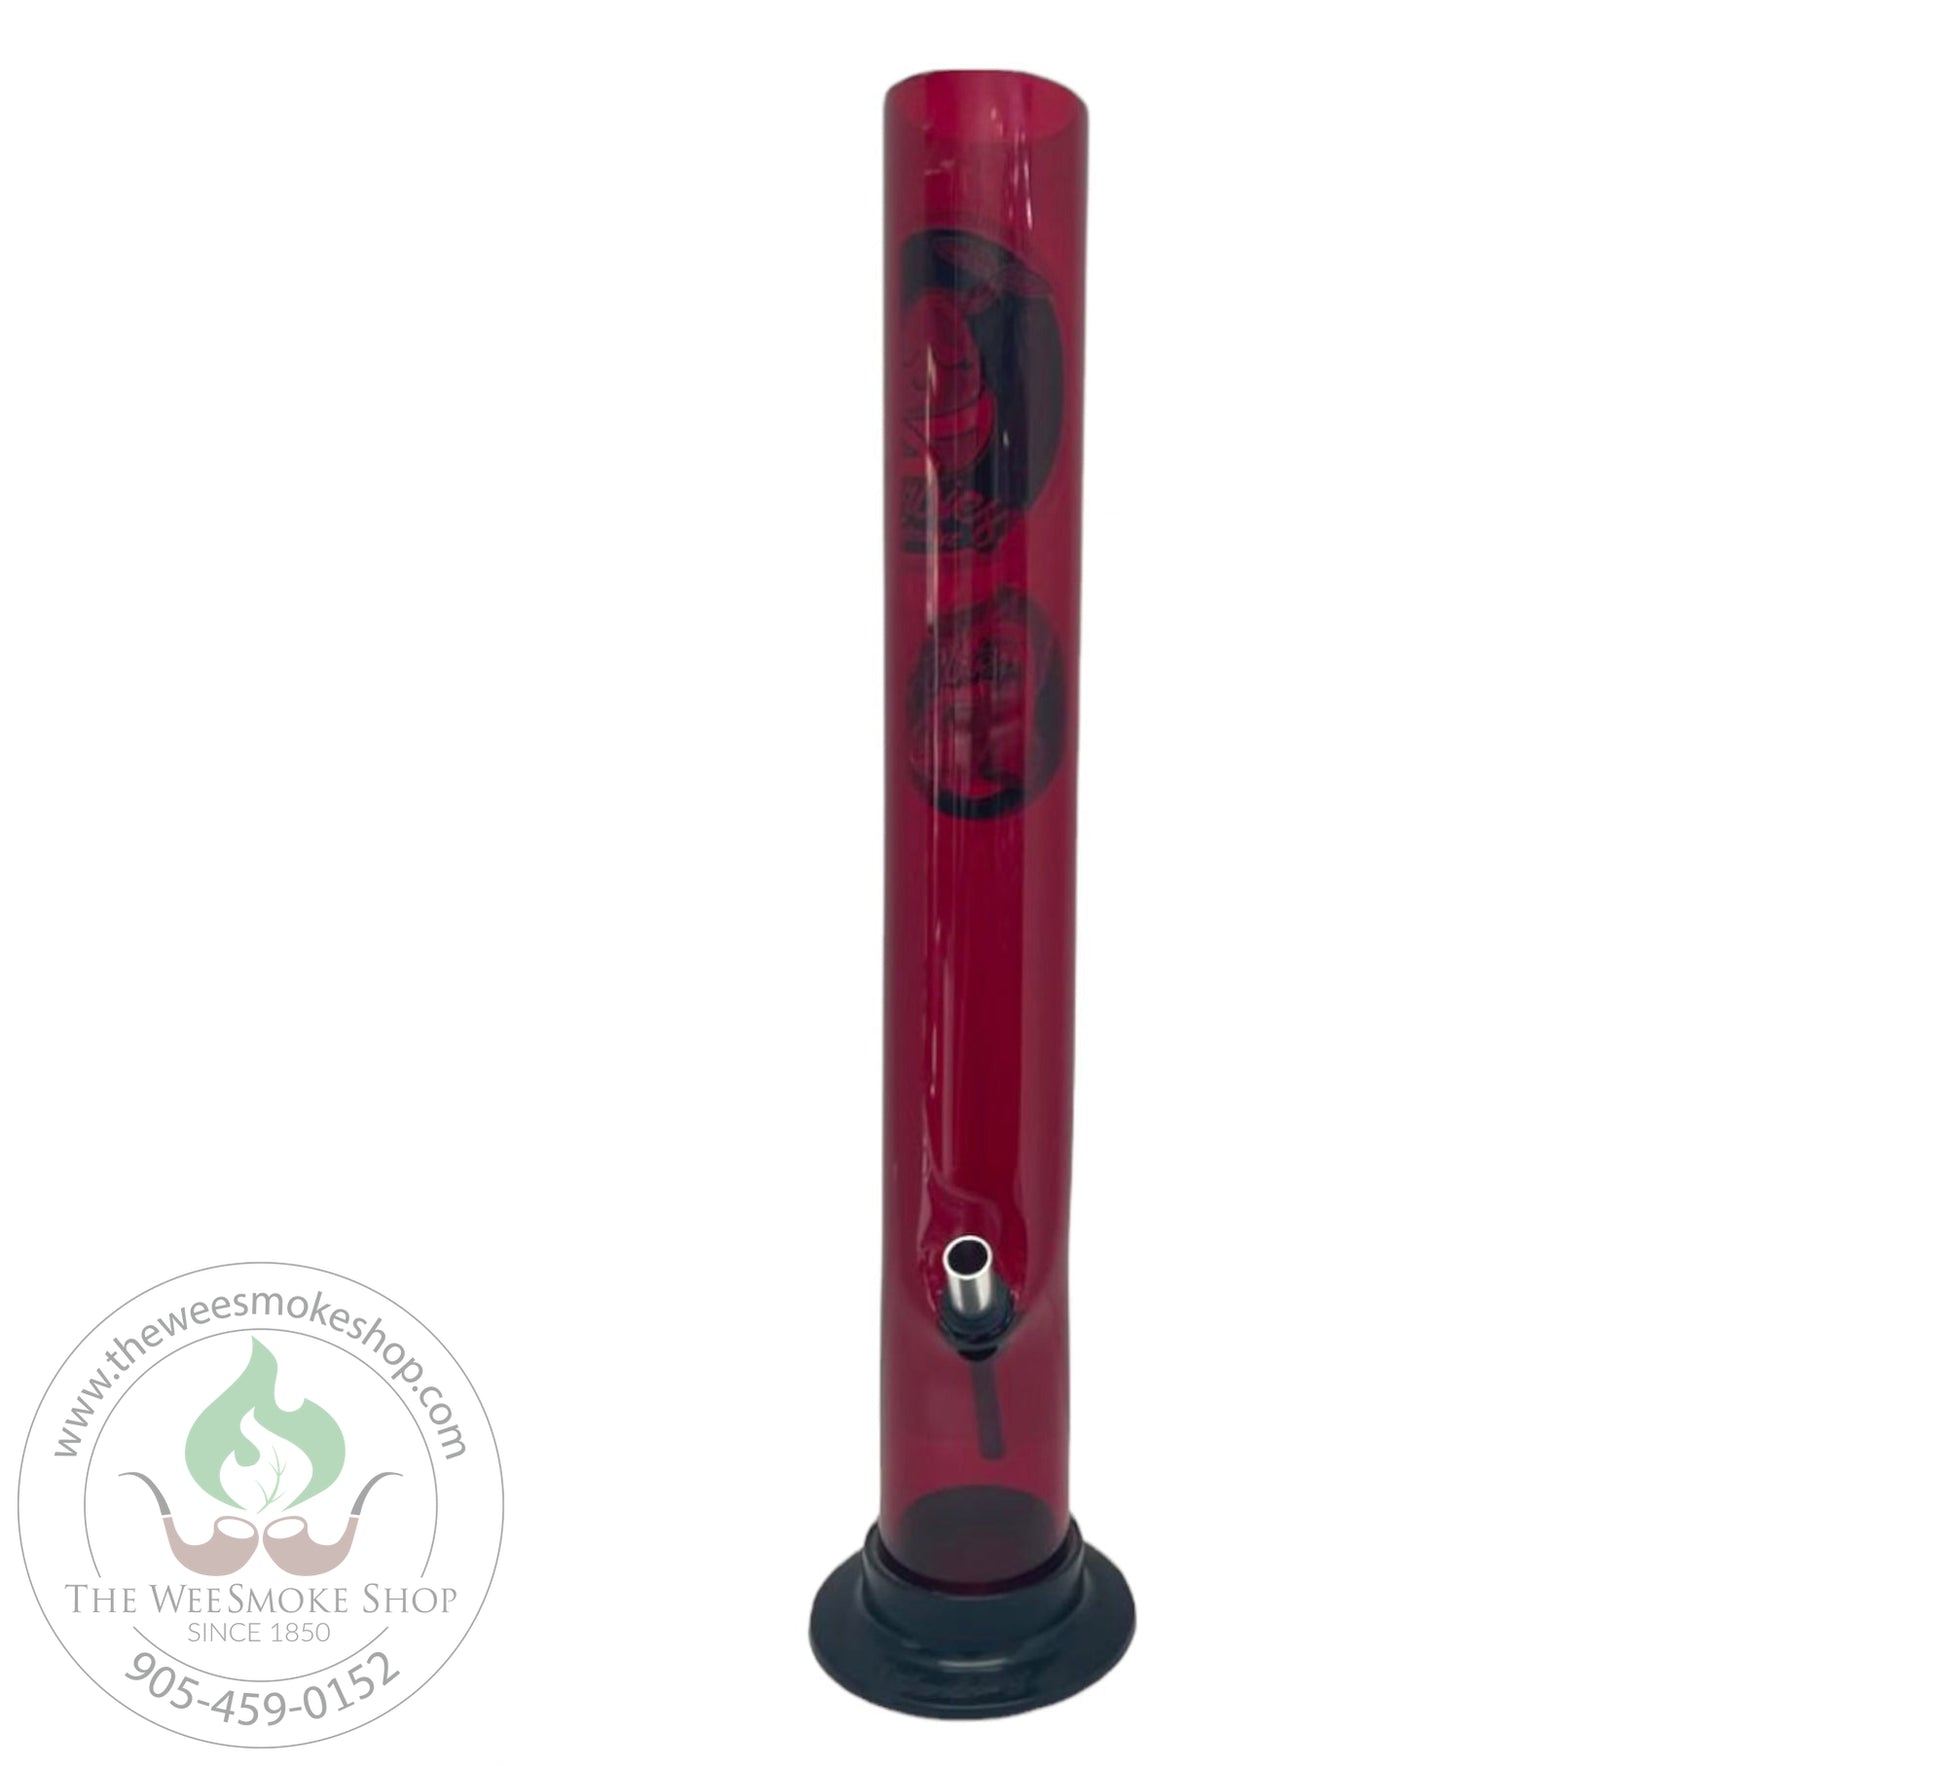 Herbies 15" Acrylic Straight Shooter Bong - Red - The Wee Smoke Shop